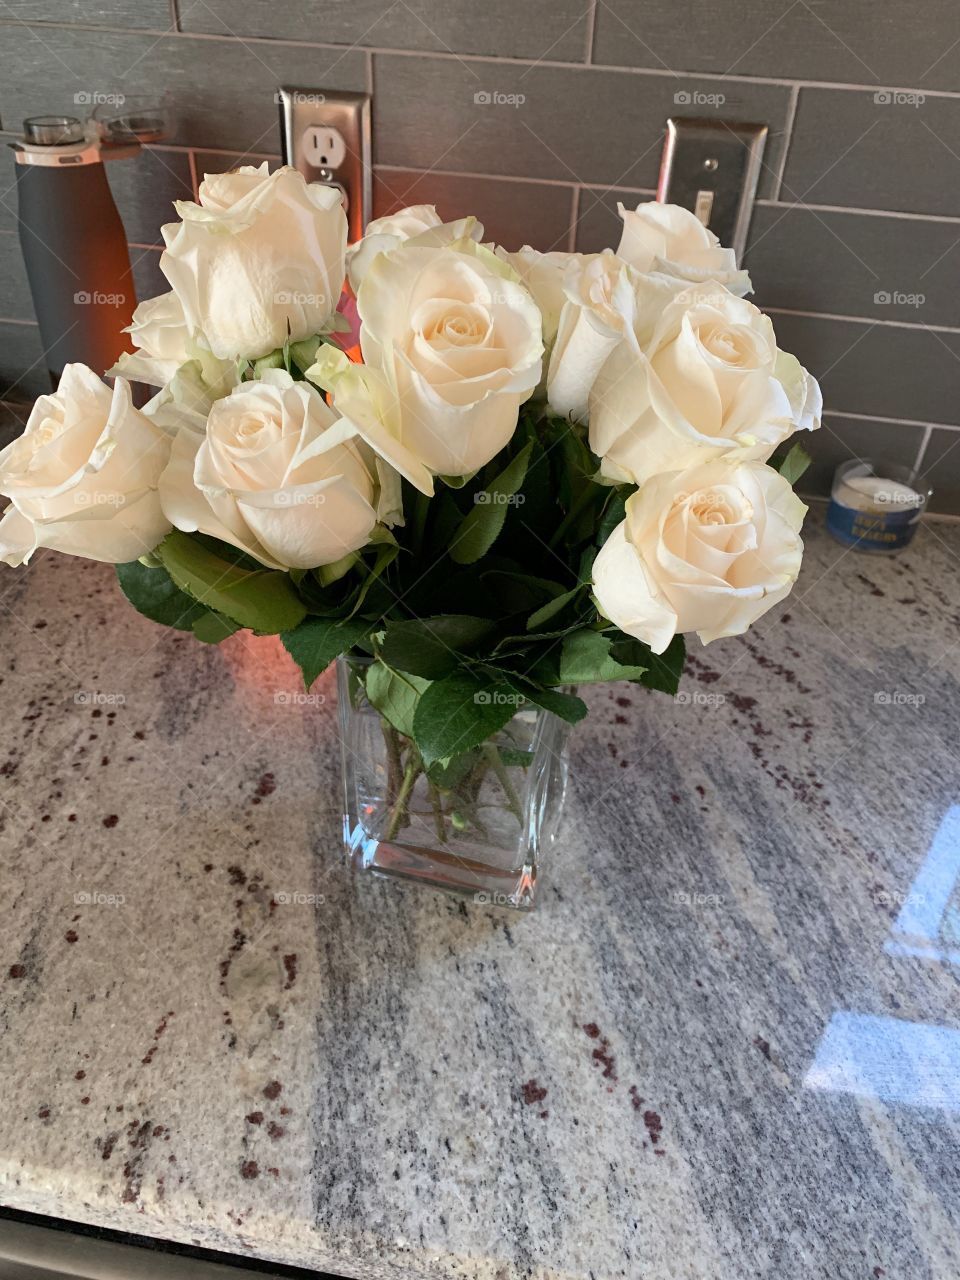 Beautiful white roses with a hint of pale pink